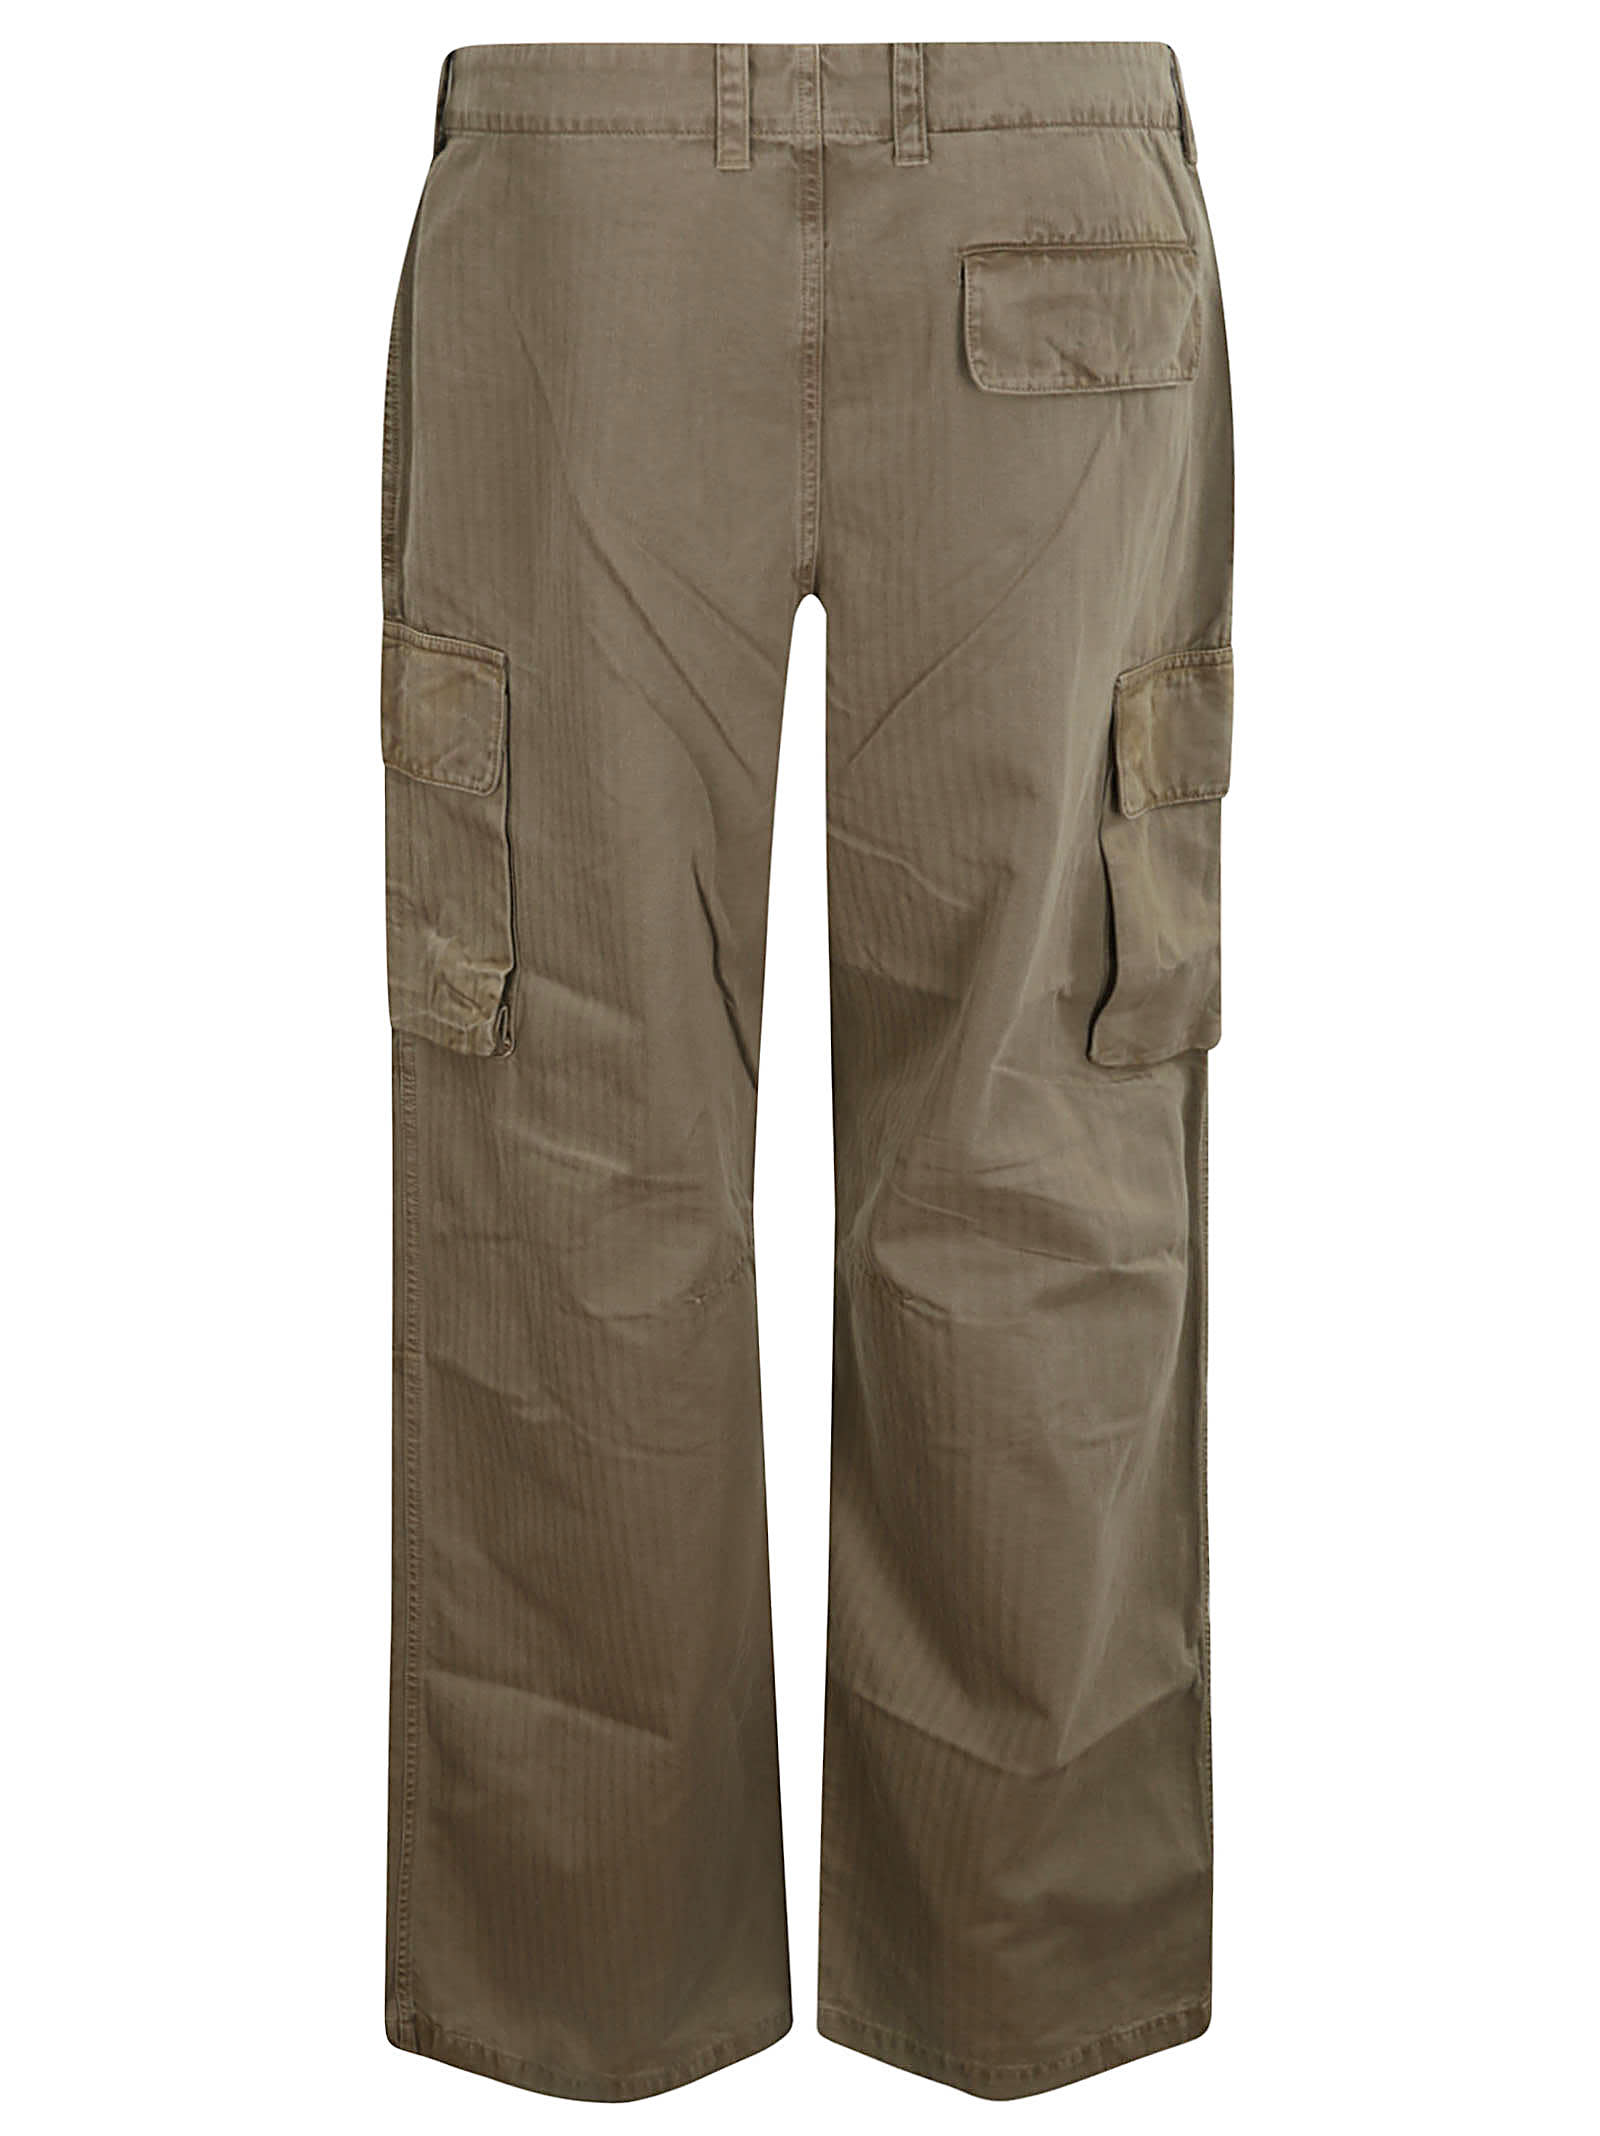 Shop Our Legacy Mount Cargo In Uniform Olive